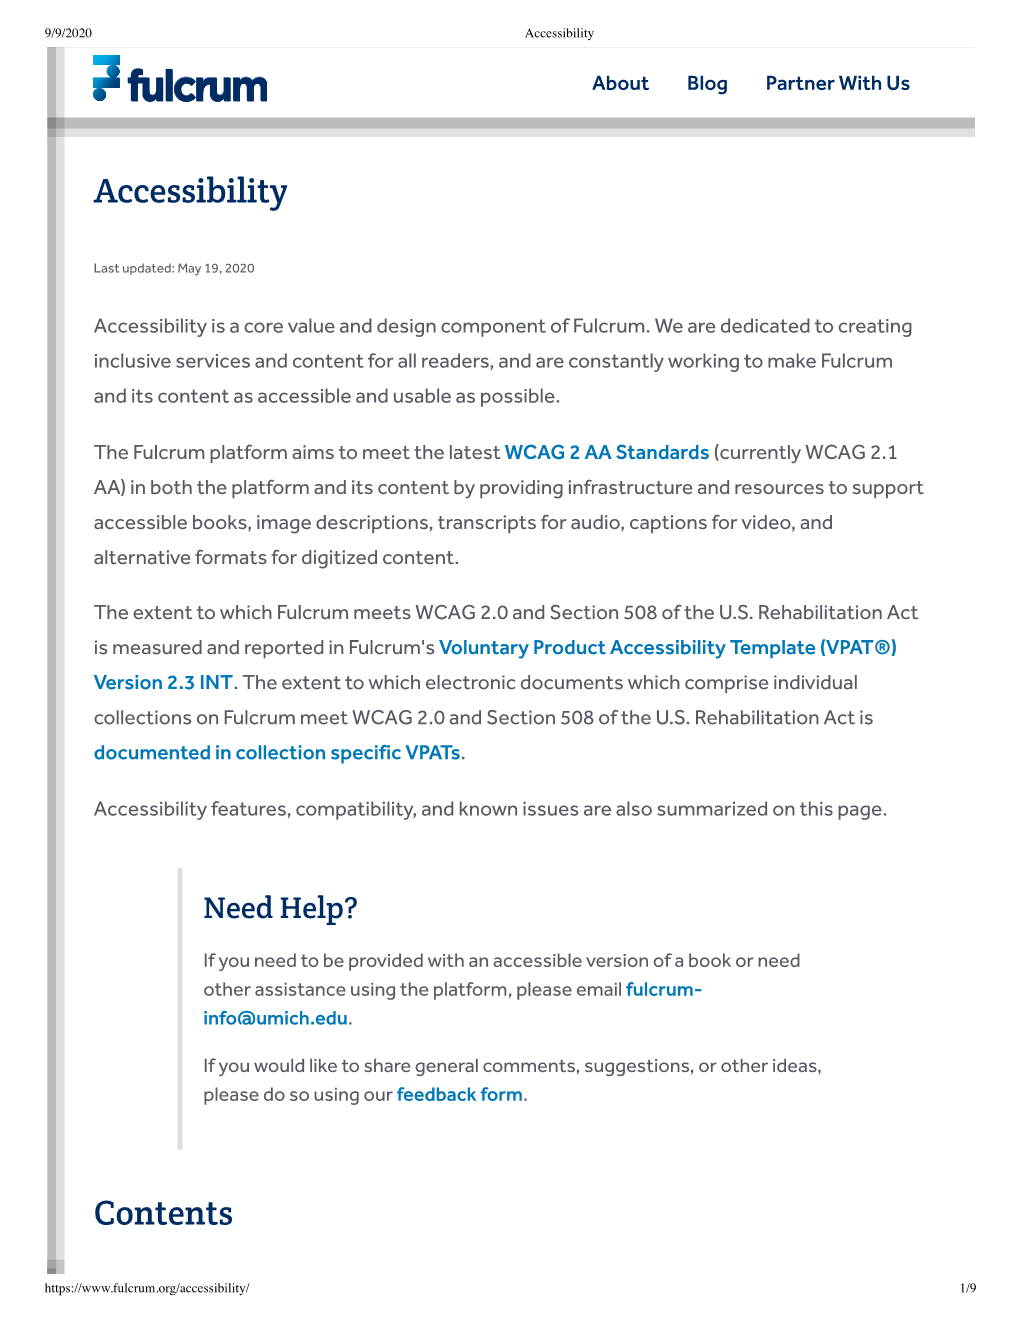 Accessibility Contents